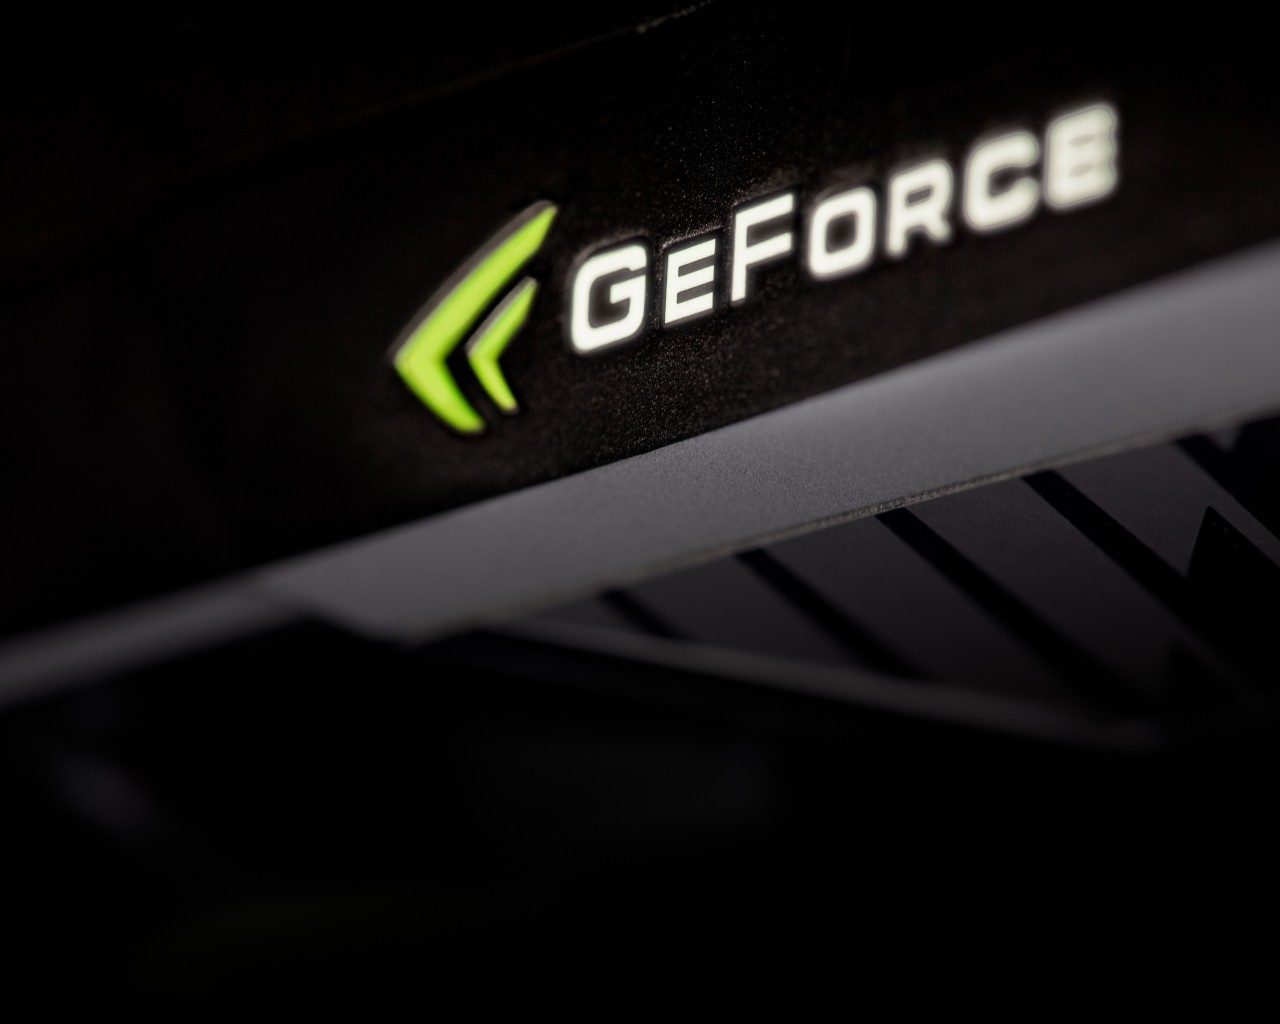 GeForce Graphics for 1280 x 1024 resolution